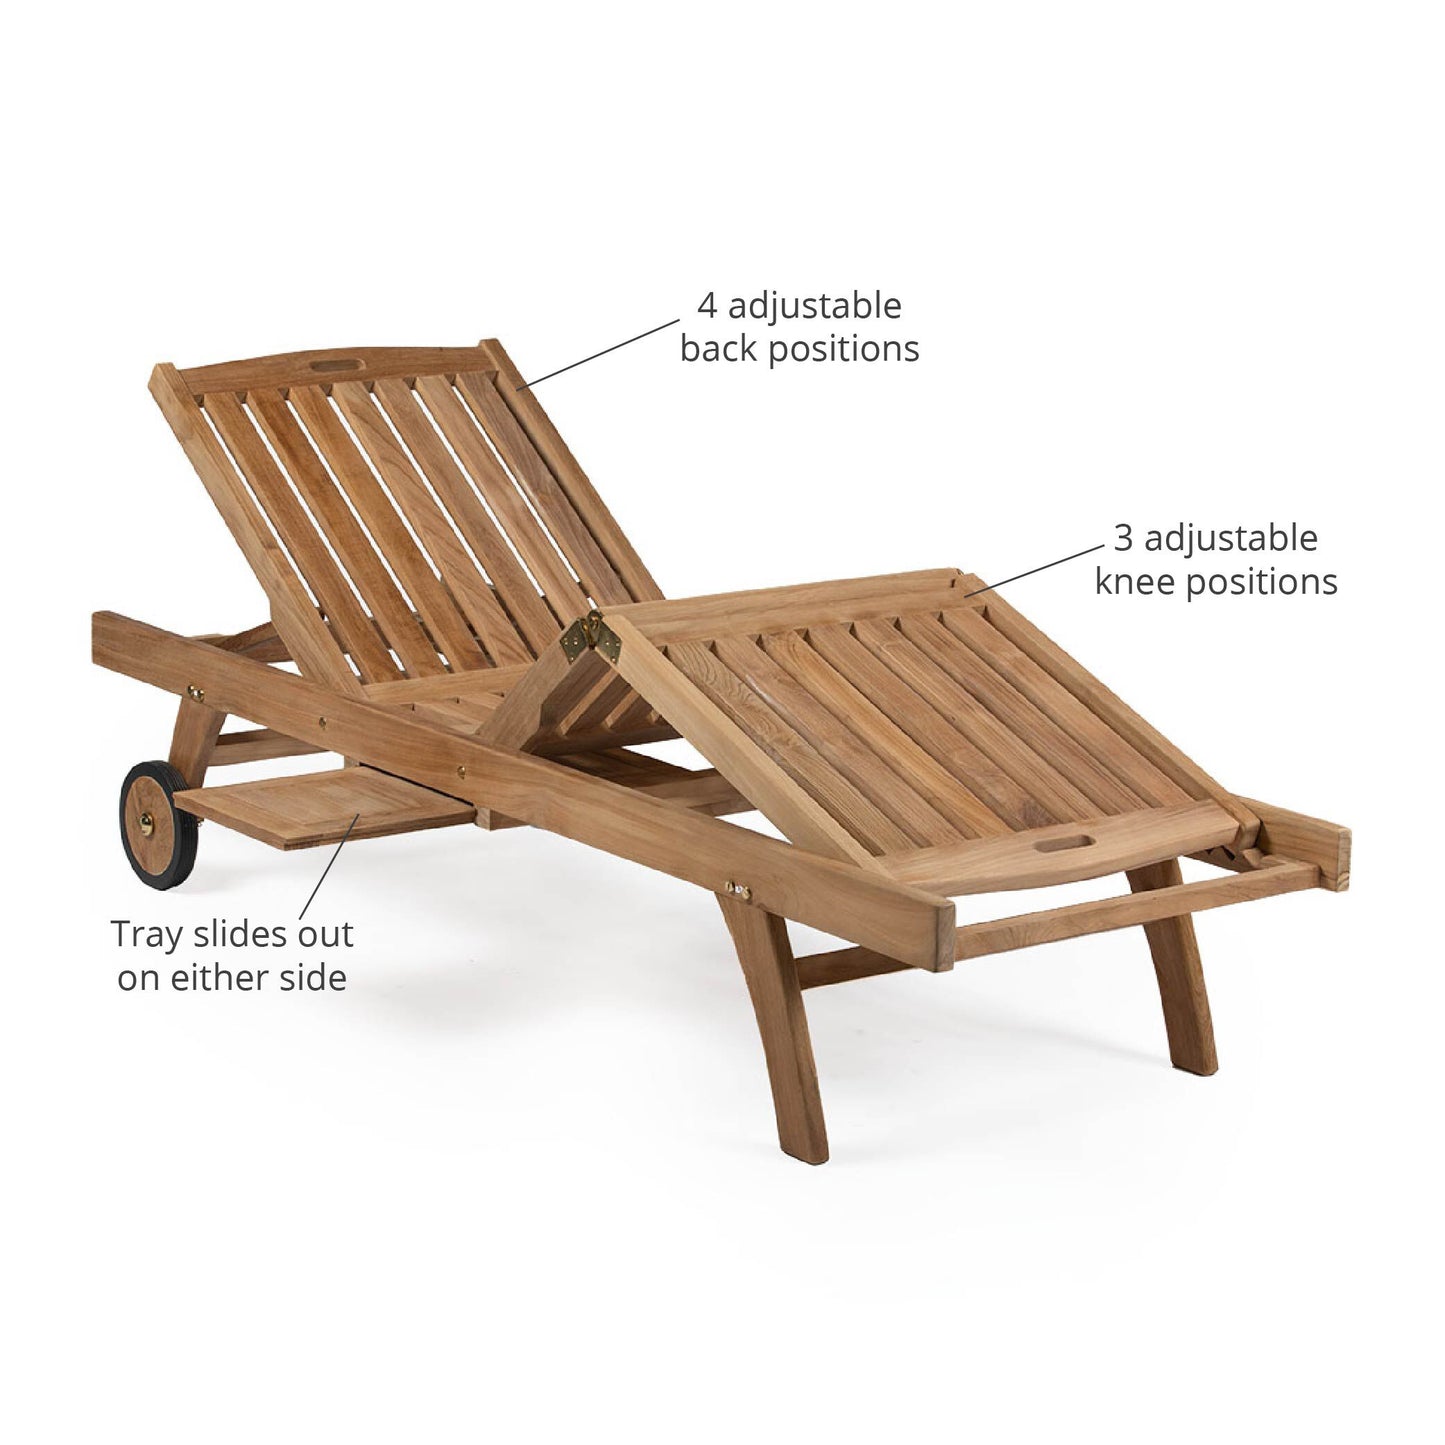 Hawthorne Grade A Teak Reclining Lounger with Optional Armrests - Optional Armrests: No Armrests | No Armrests - view 19